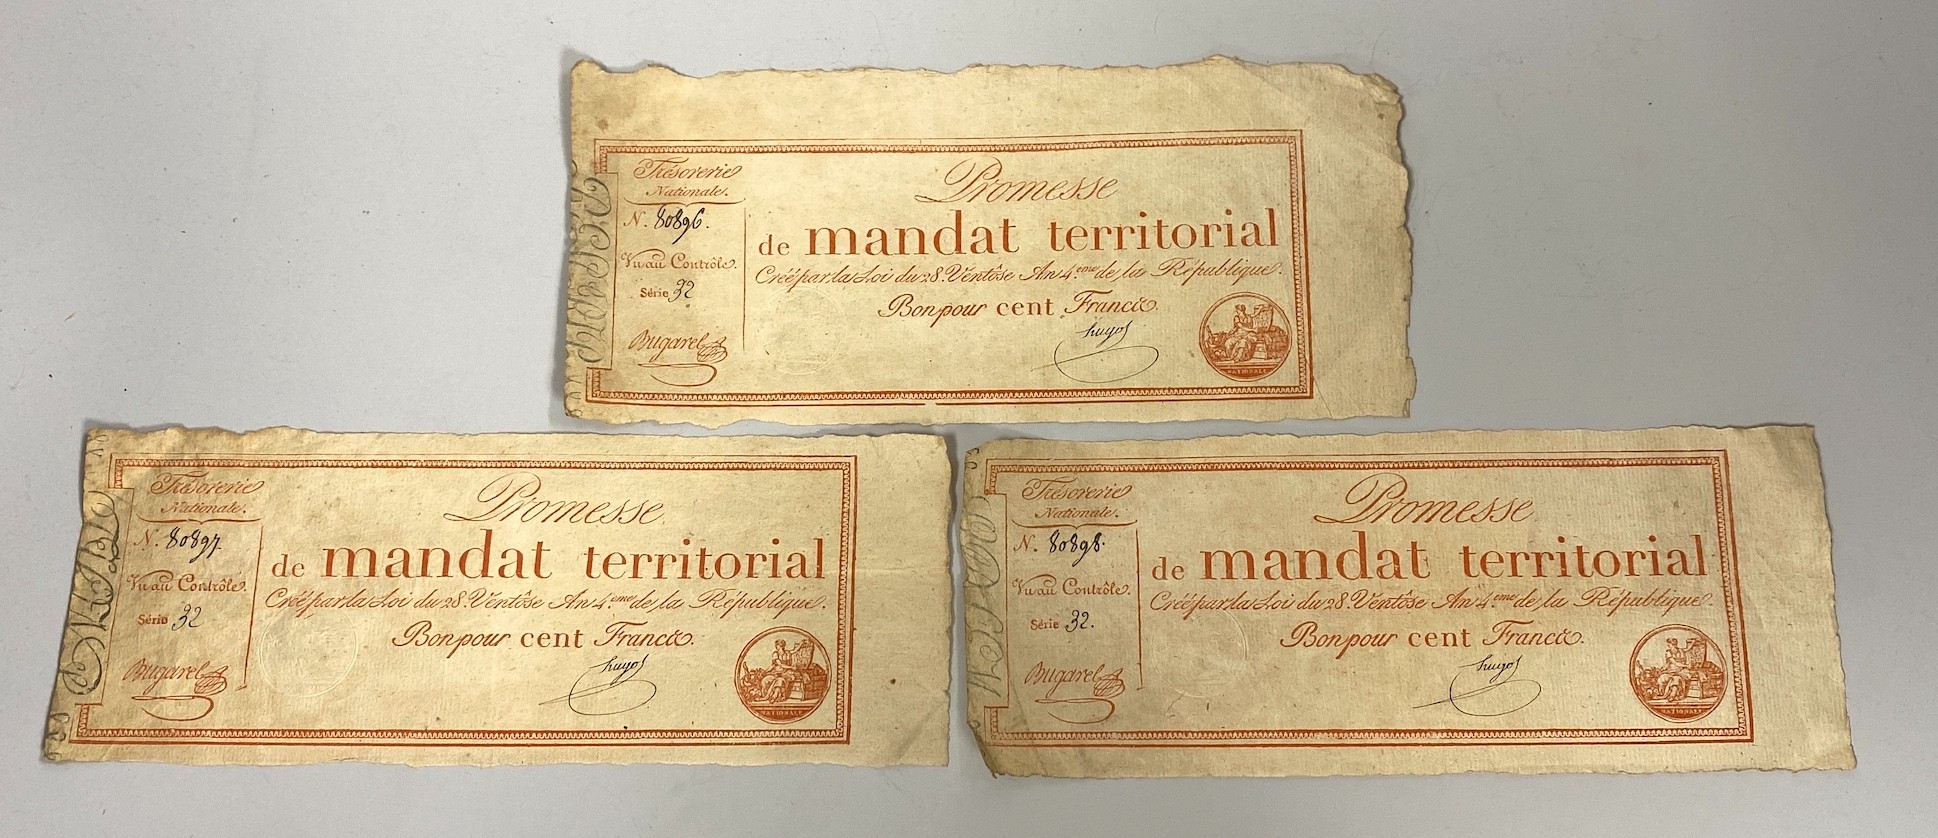 French Revolutionary banknotes, three Mandat Territorial Cent Francs No. 80896-80898, Series 32, 'Promesse De Mandat Territorial', one embossed stamp (3)